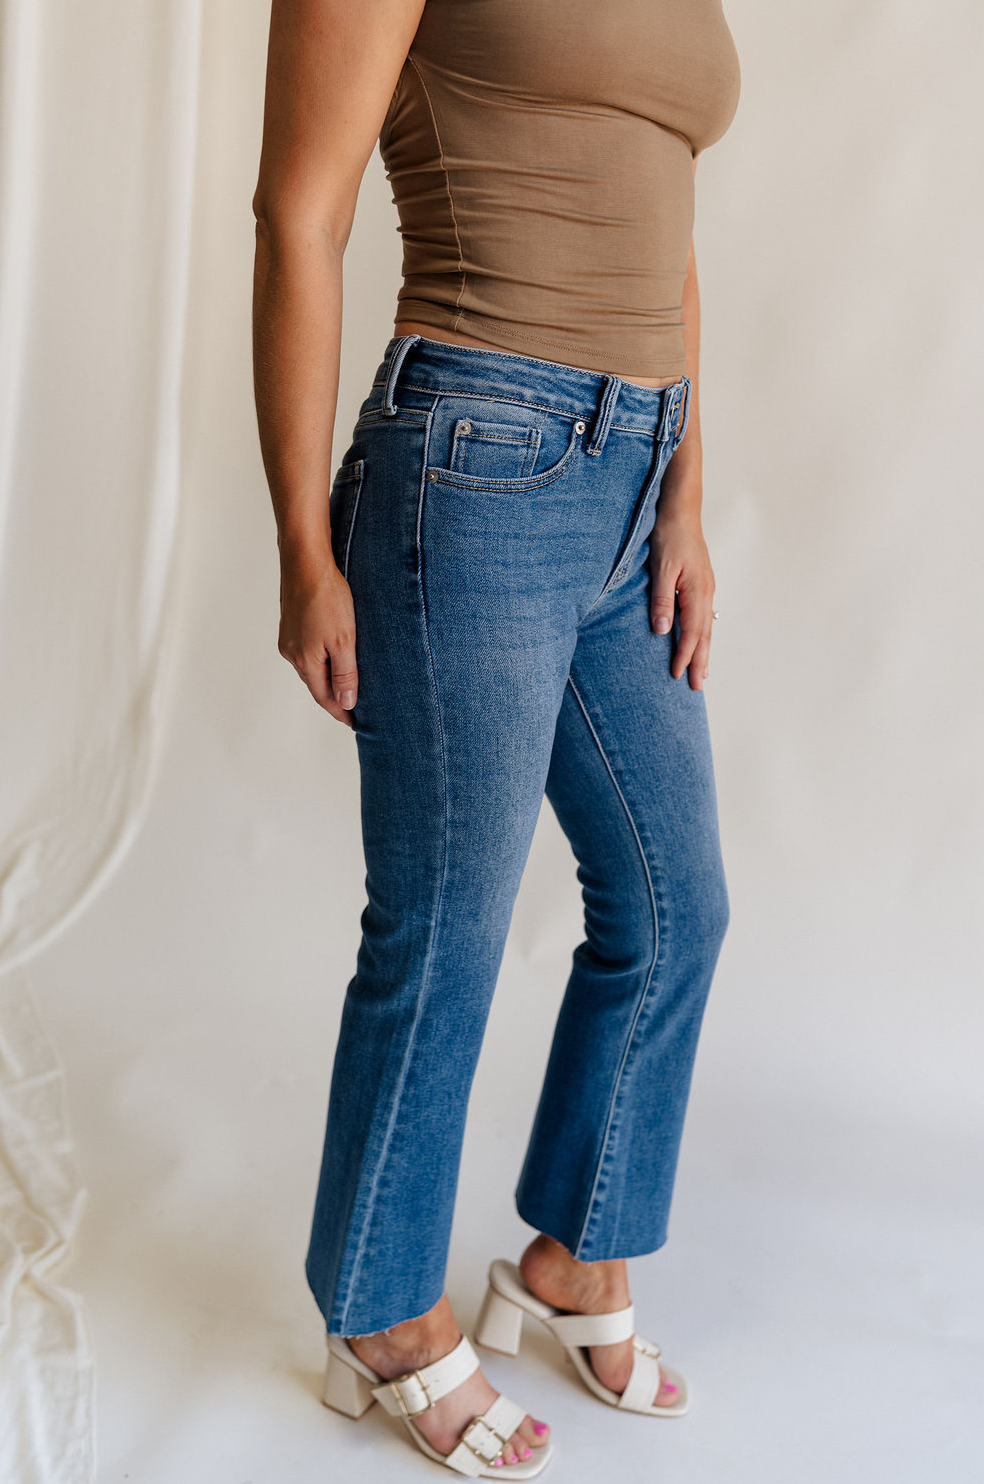 Side view of female model wearing the Emerson Medium Wash Straight Leg Jeans which features Medium Wash Denim, Two Front Pockets, Two Back Pockets, Front Zipper with Button Closure, Belt Loops and Straight Pant Legs